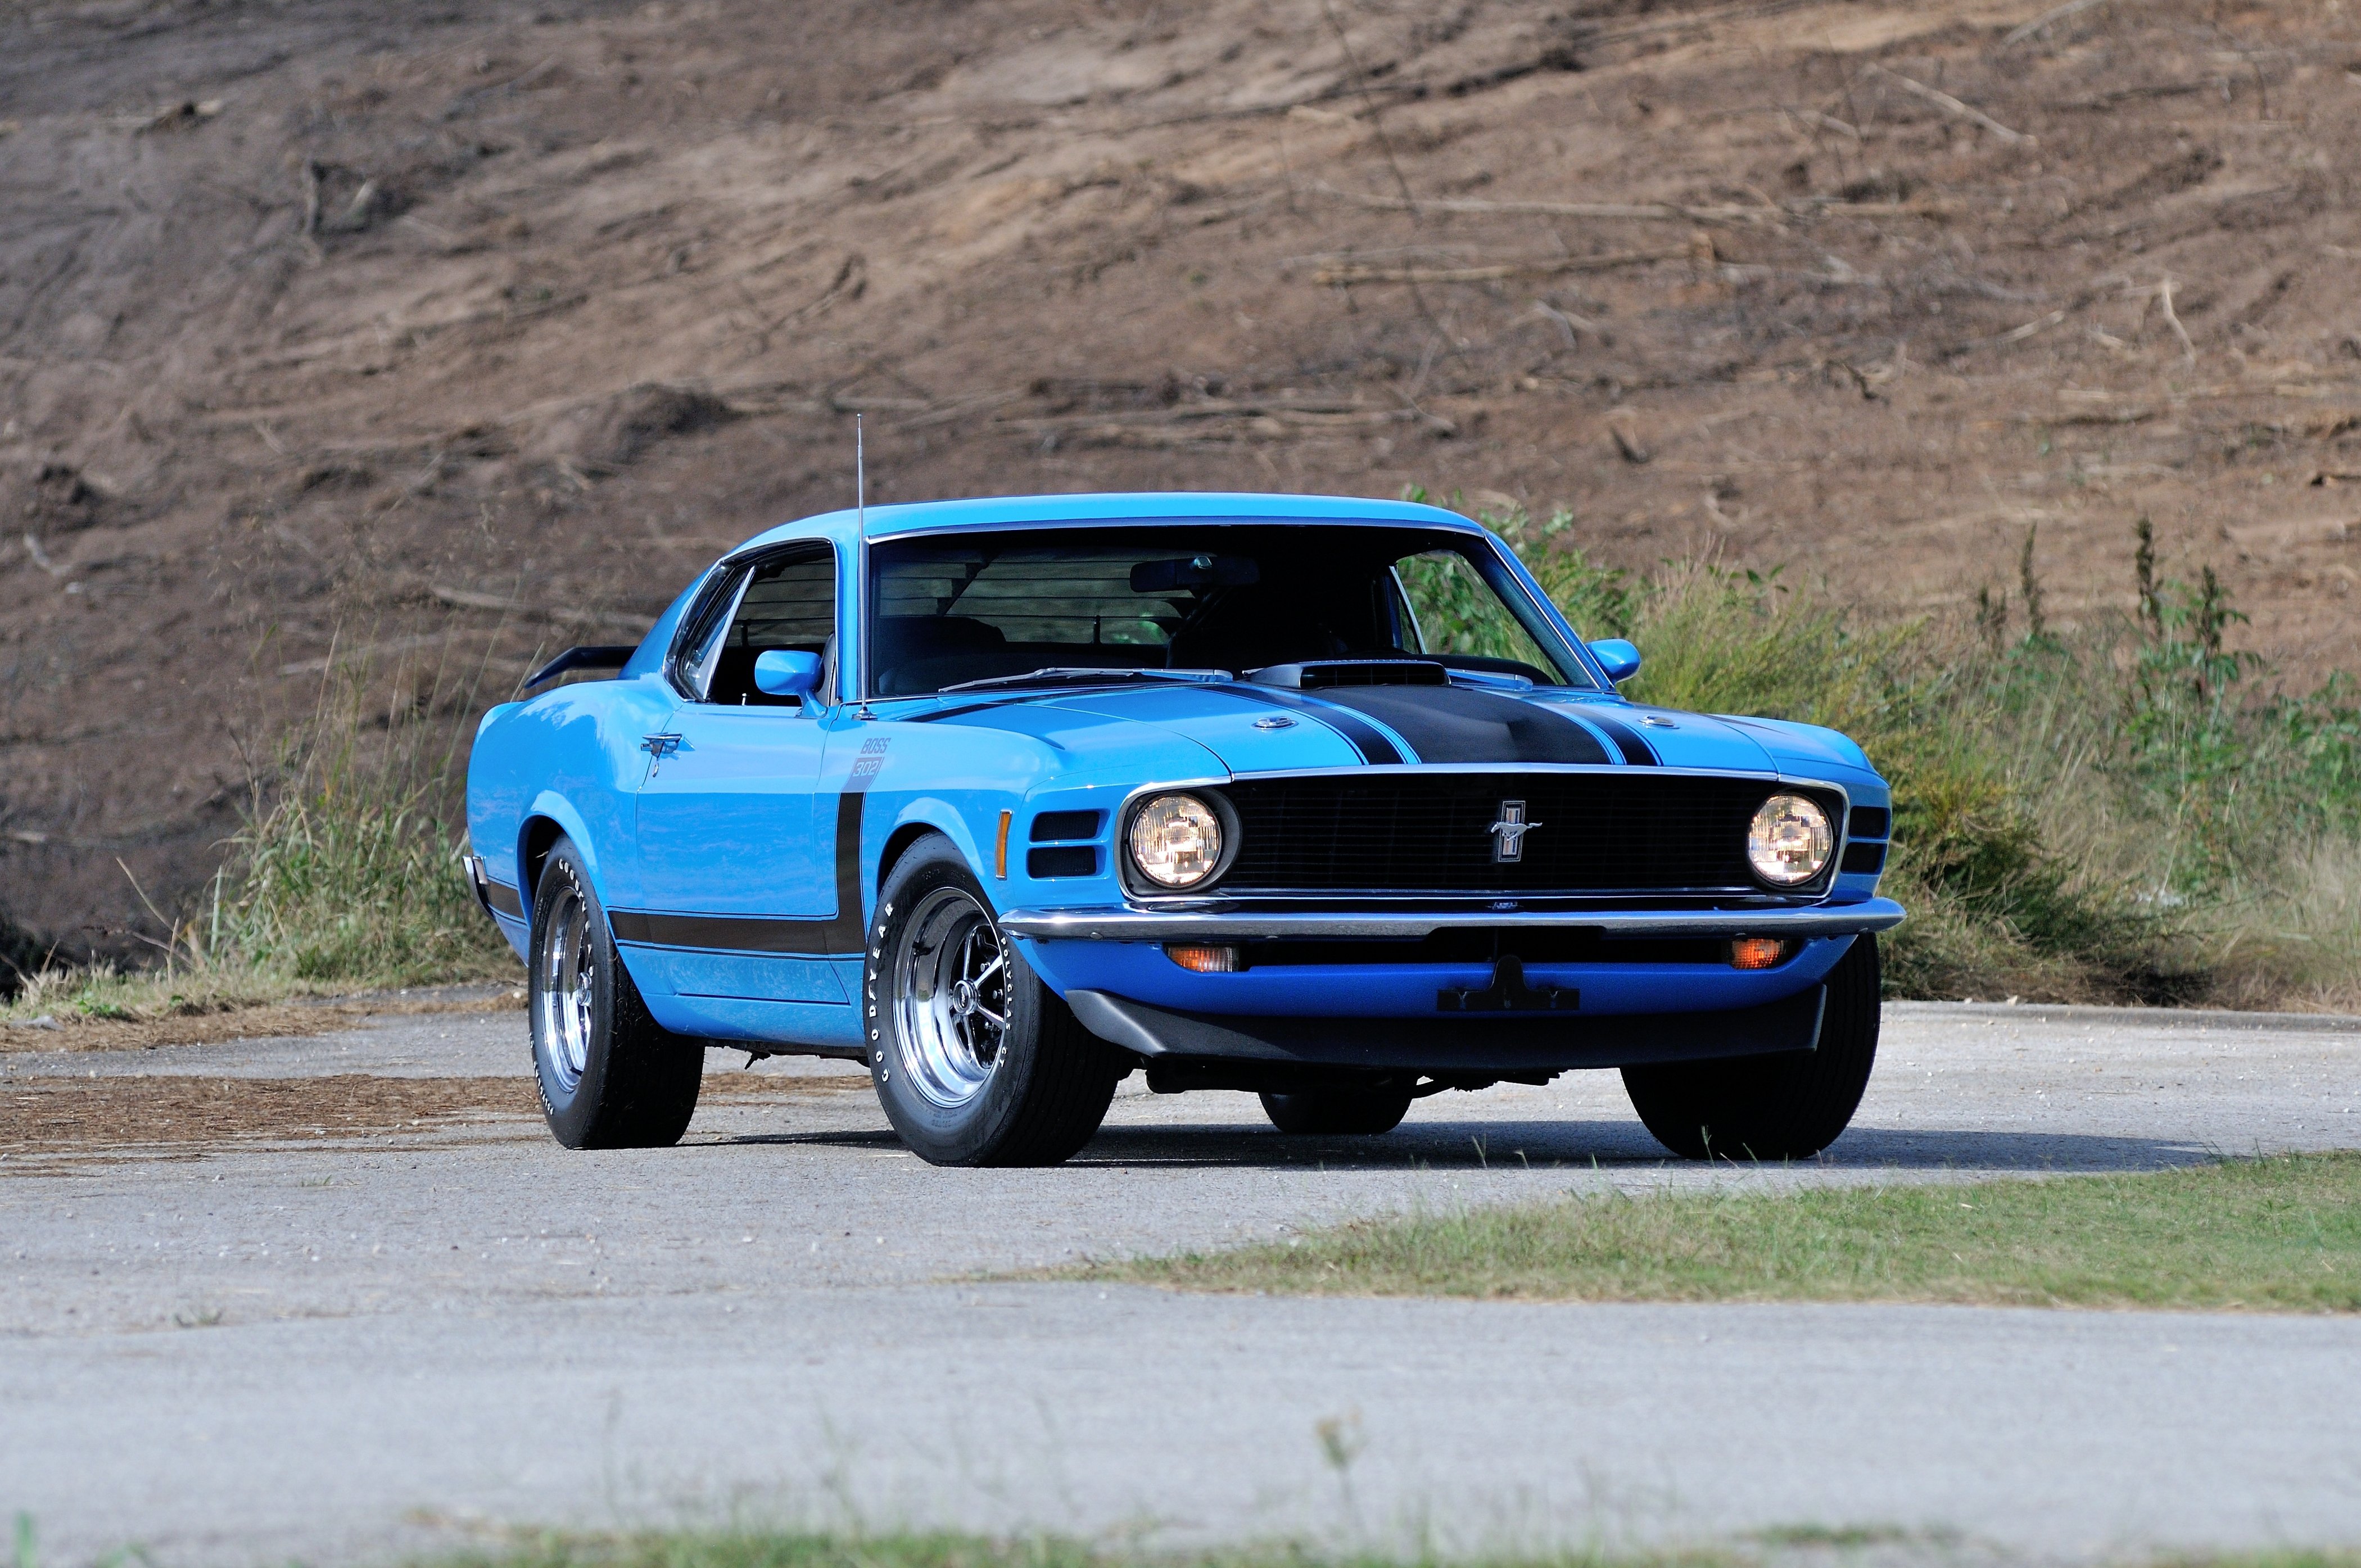 Ford Mustang Boss 302 Fastback Muscle Classic USA 4200x2790 10 Wallpaperx2790